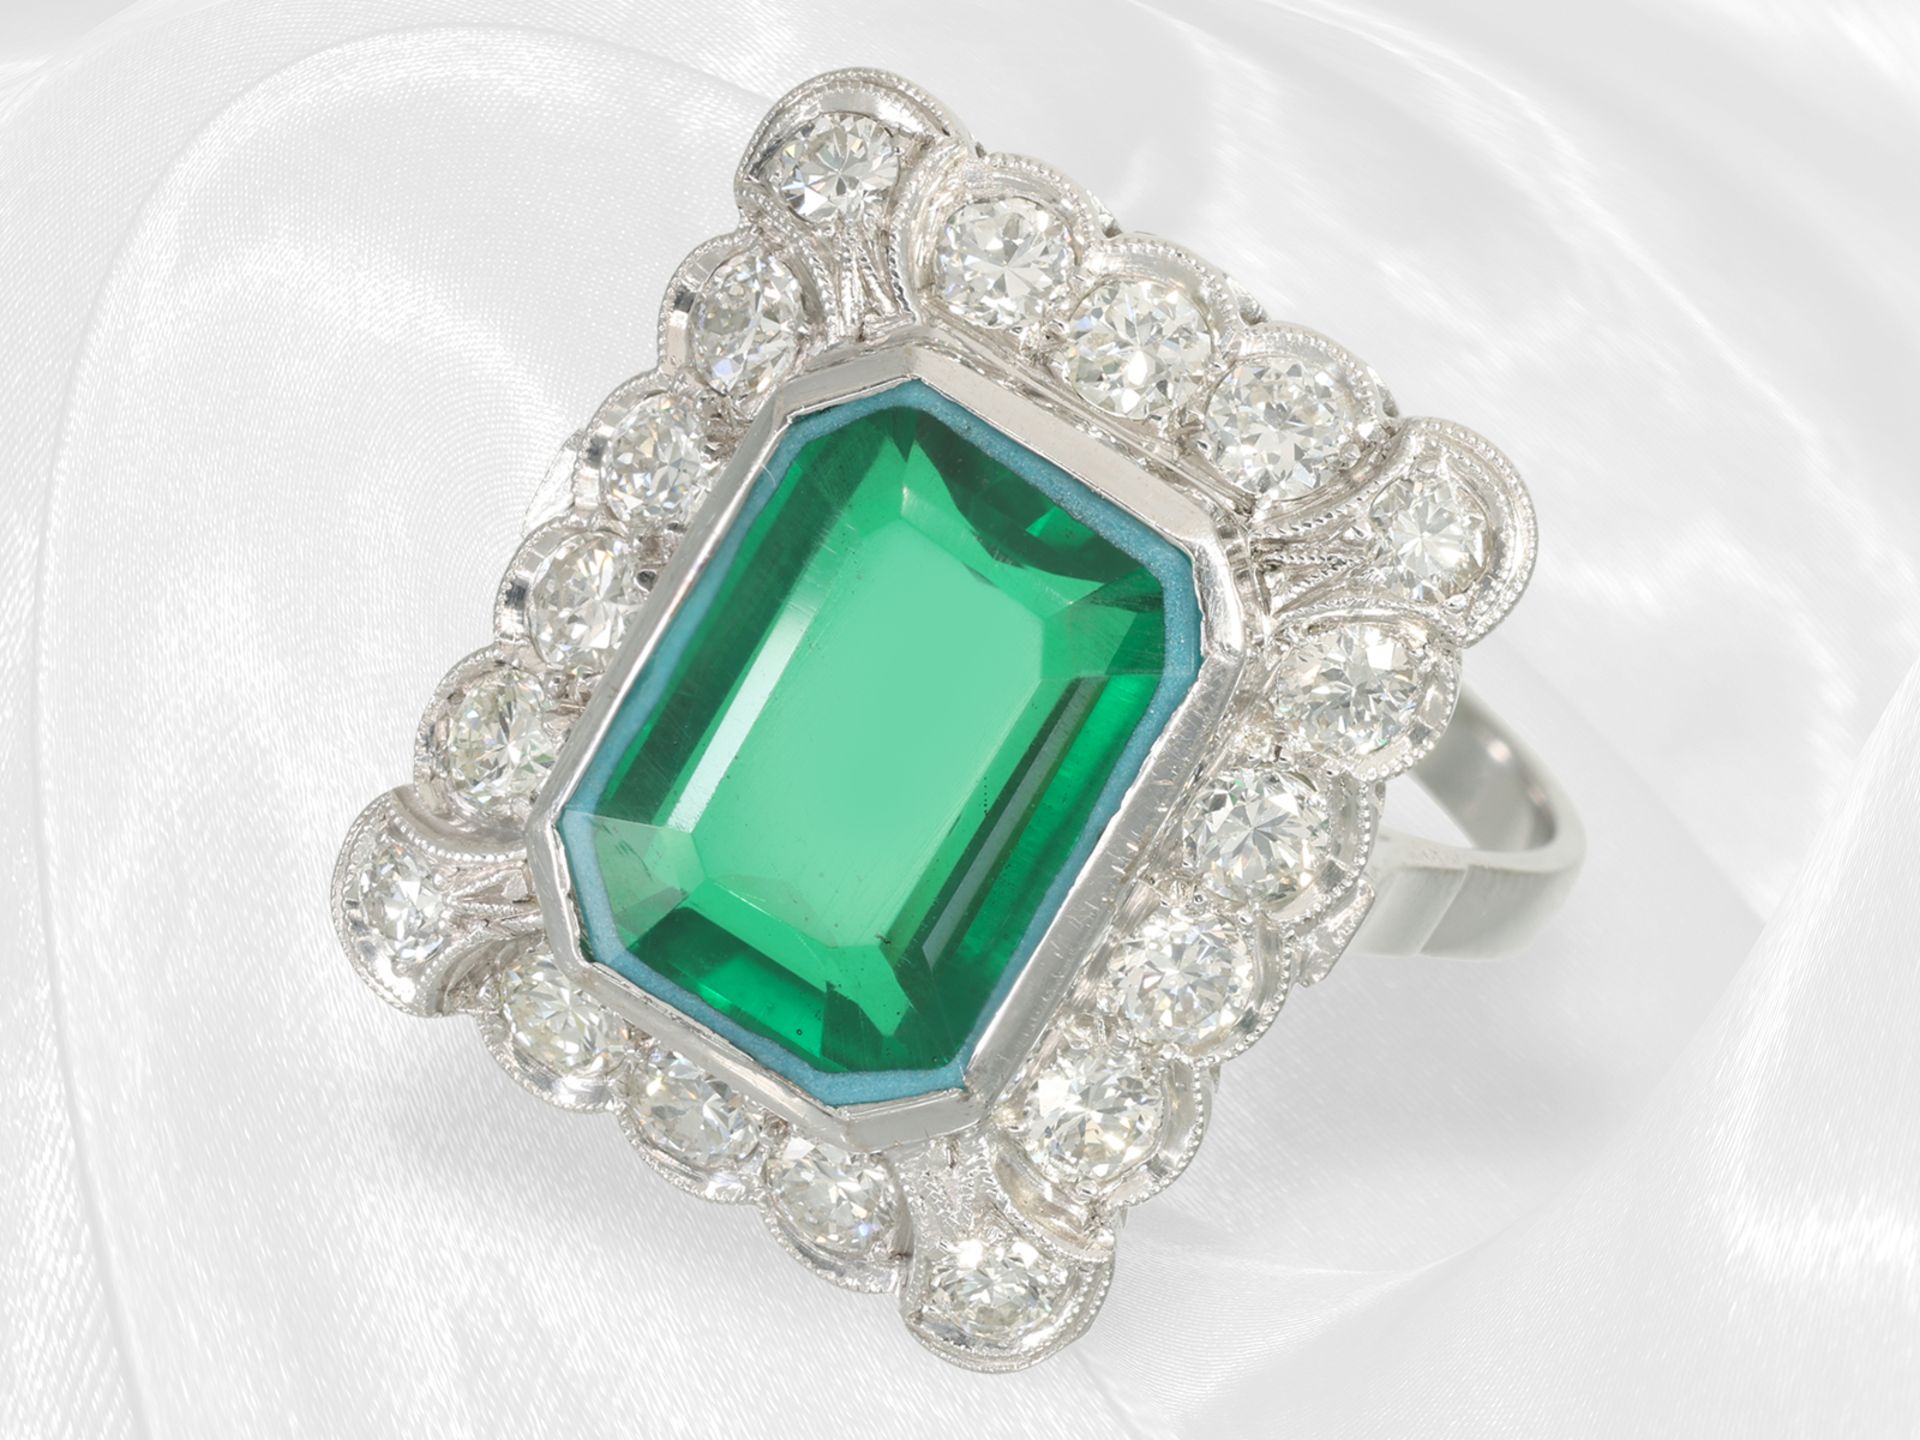 Very decoratively crafted goldsmith's ring with brilliant-cut diamonds and large tourmaline, a total